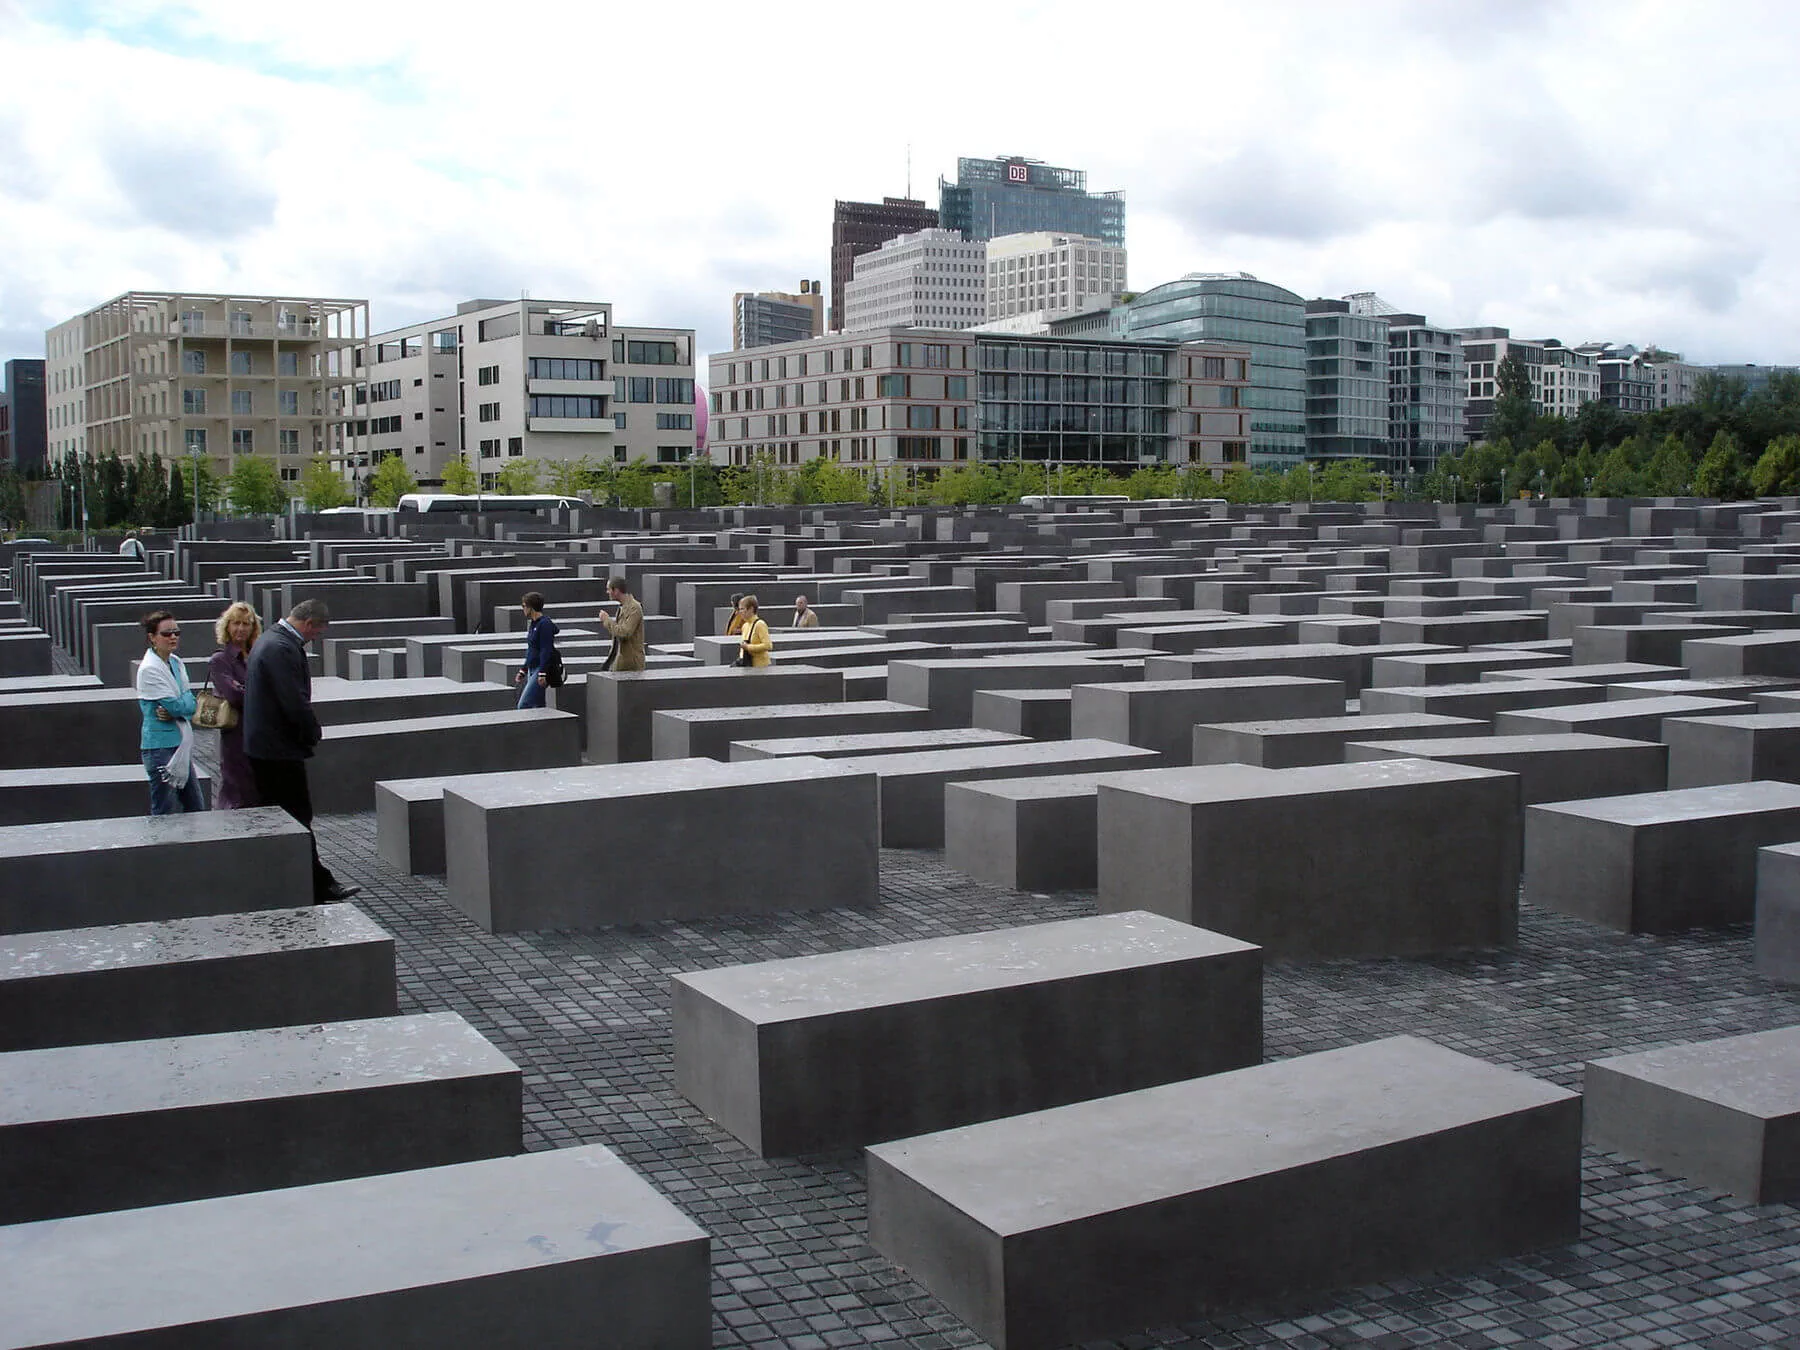 Somber and gray, the Memorial to the Murdered Jews of Europe is an essential stop for Berlin sightseeing